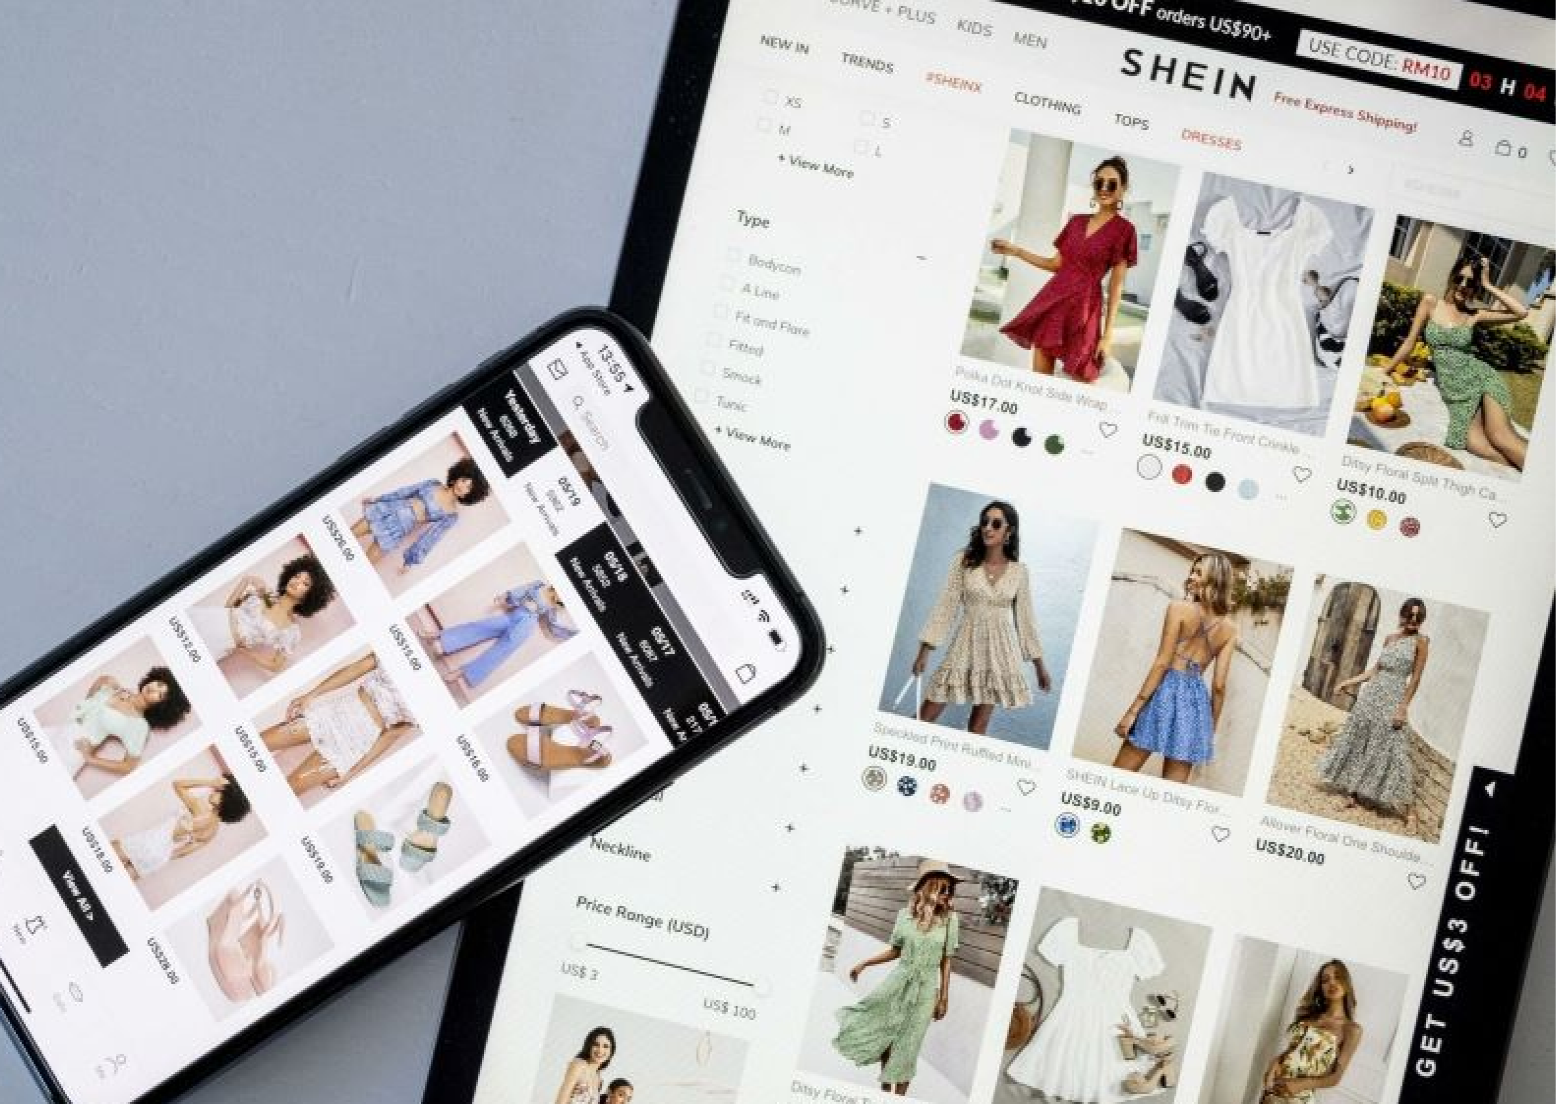 Shein, and its parent company Zoetop, has been hit by a $1.9 million dollar fine by the state of New York